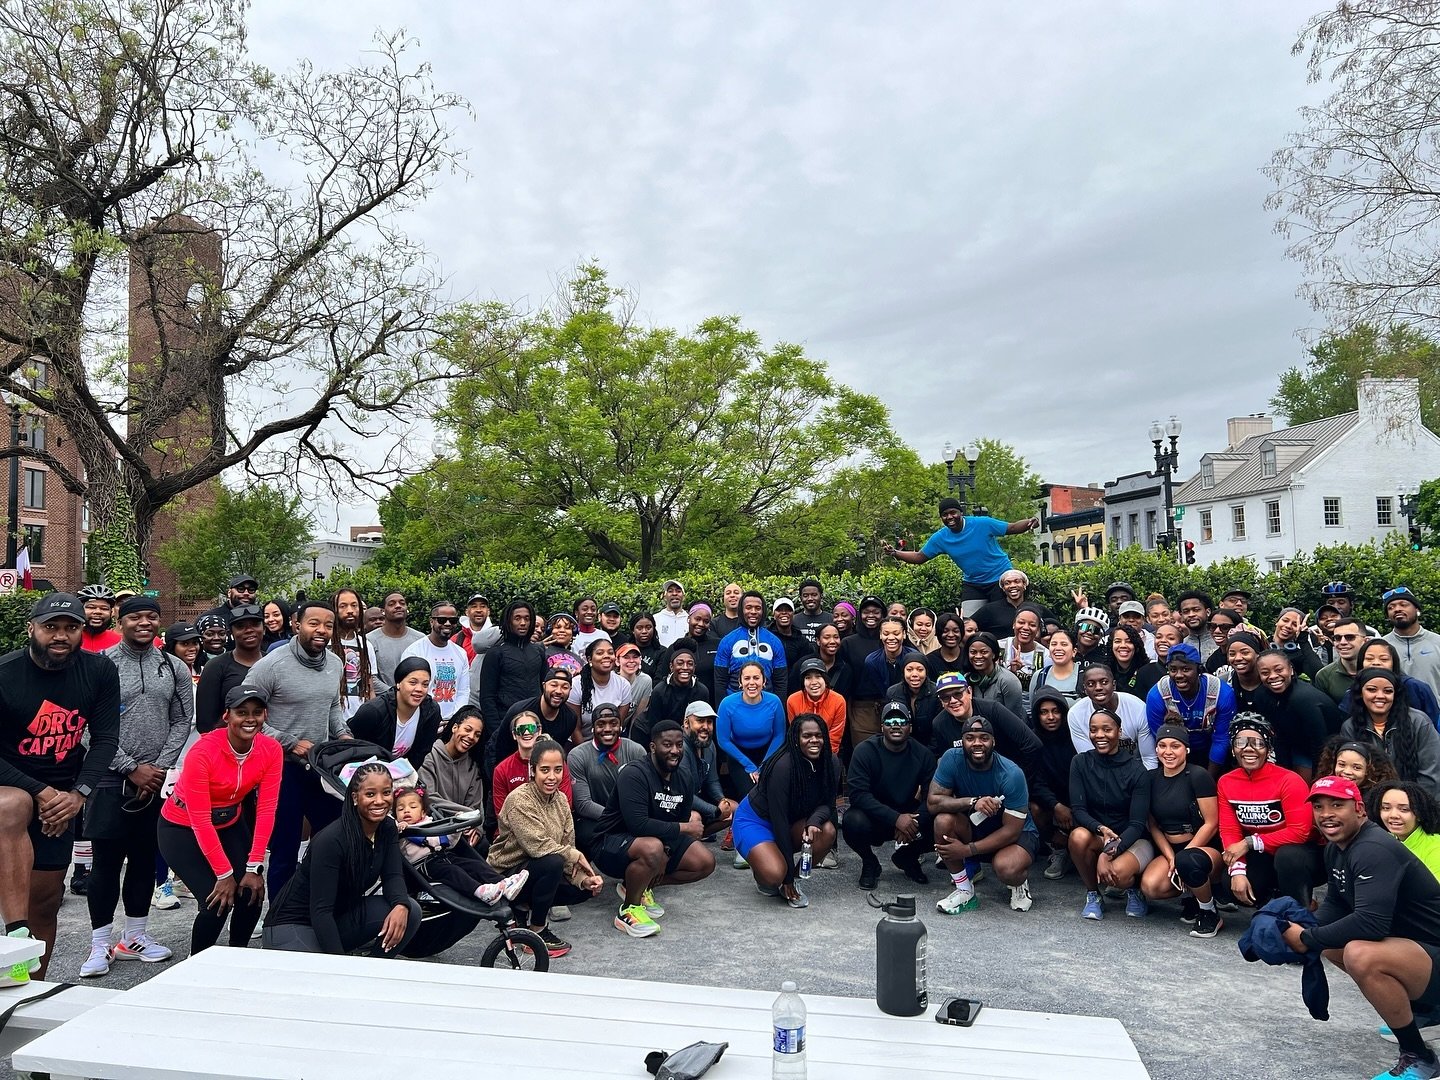 We returned to @sandlotgeorgetown for our Saturday run this week. Joined by @streetscalling.dc @broccolicity one step walking club and @rockcreeksocial .

Join us next time!